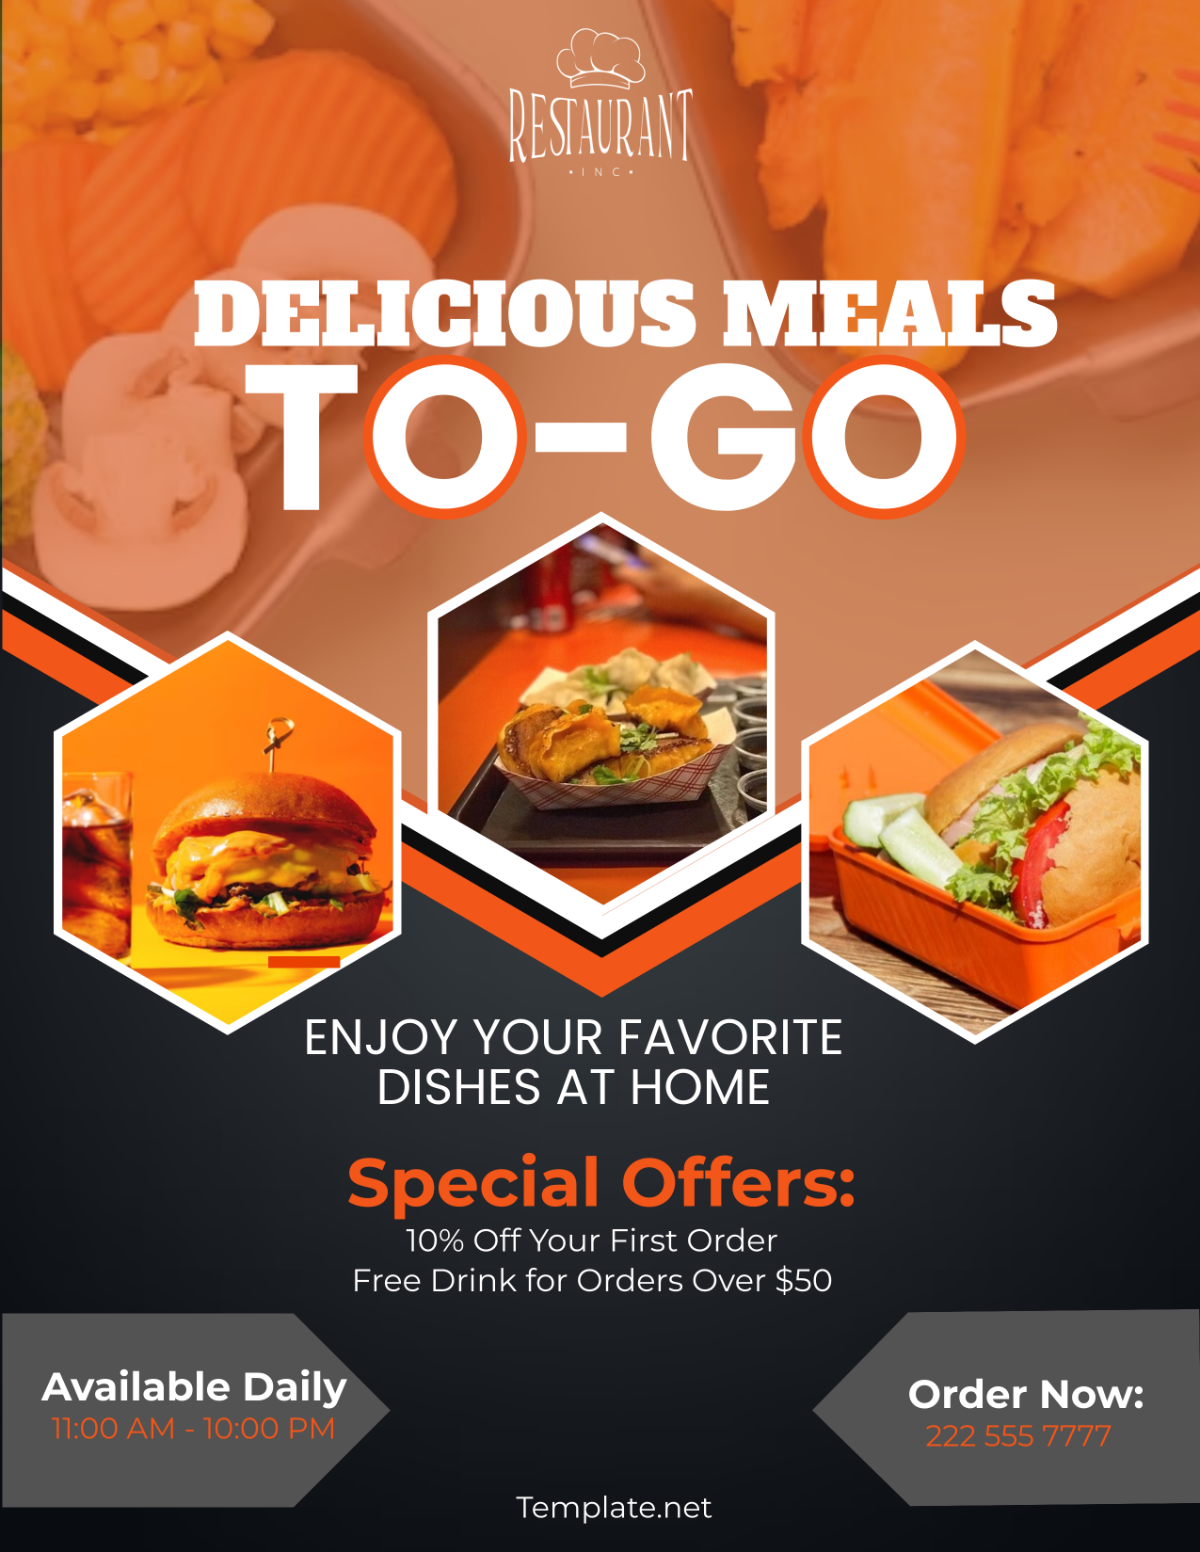 Restaurant Takeout/Delivery Flyer